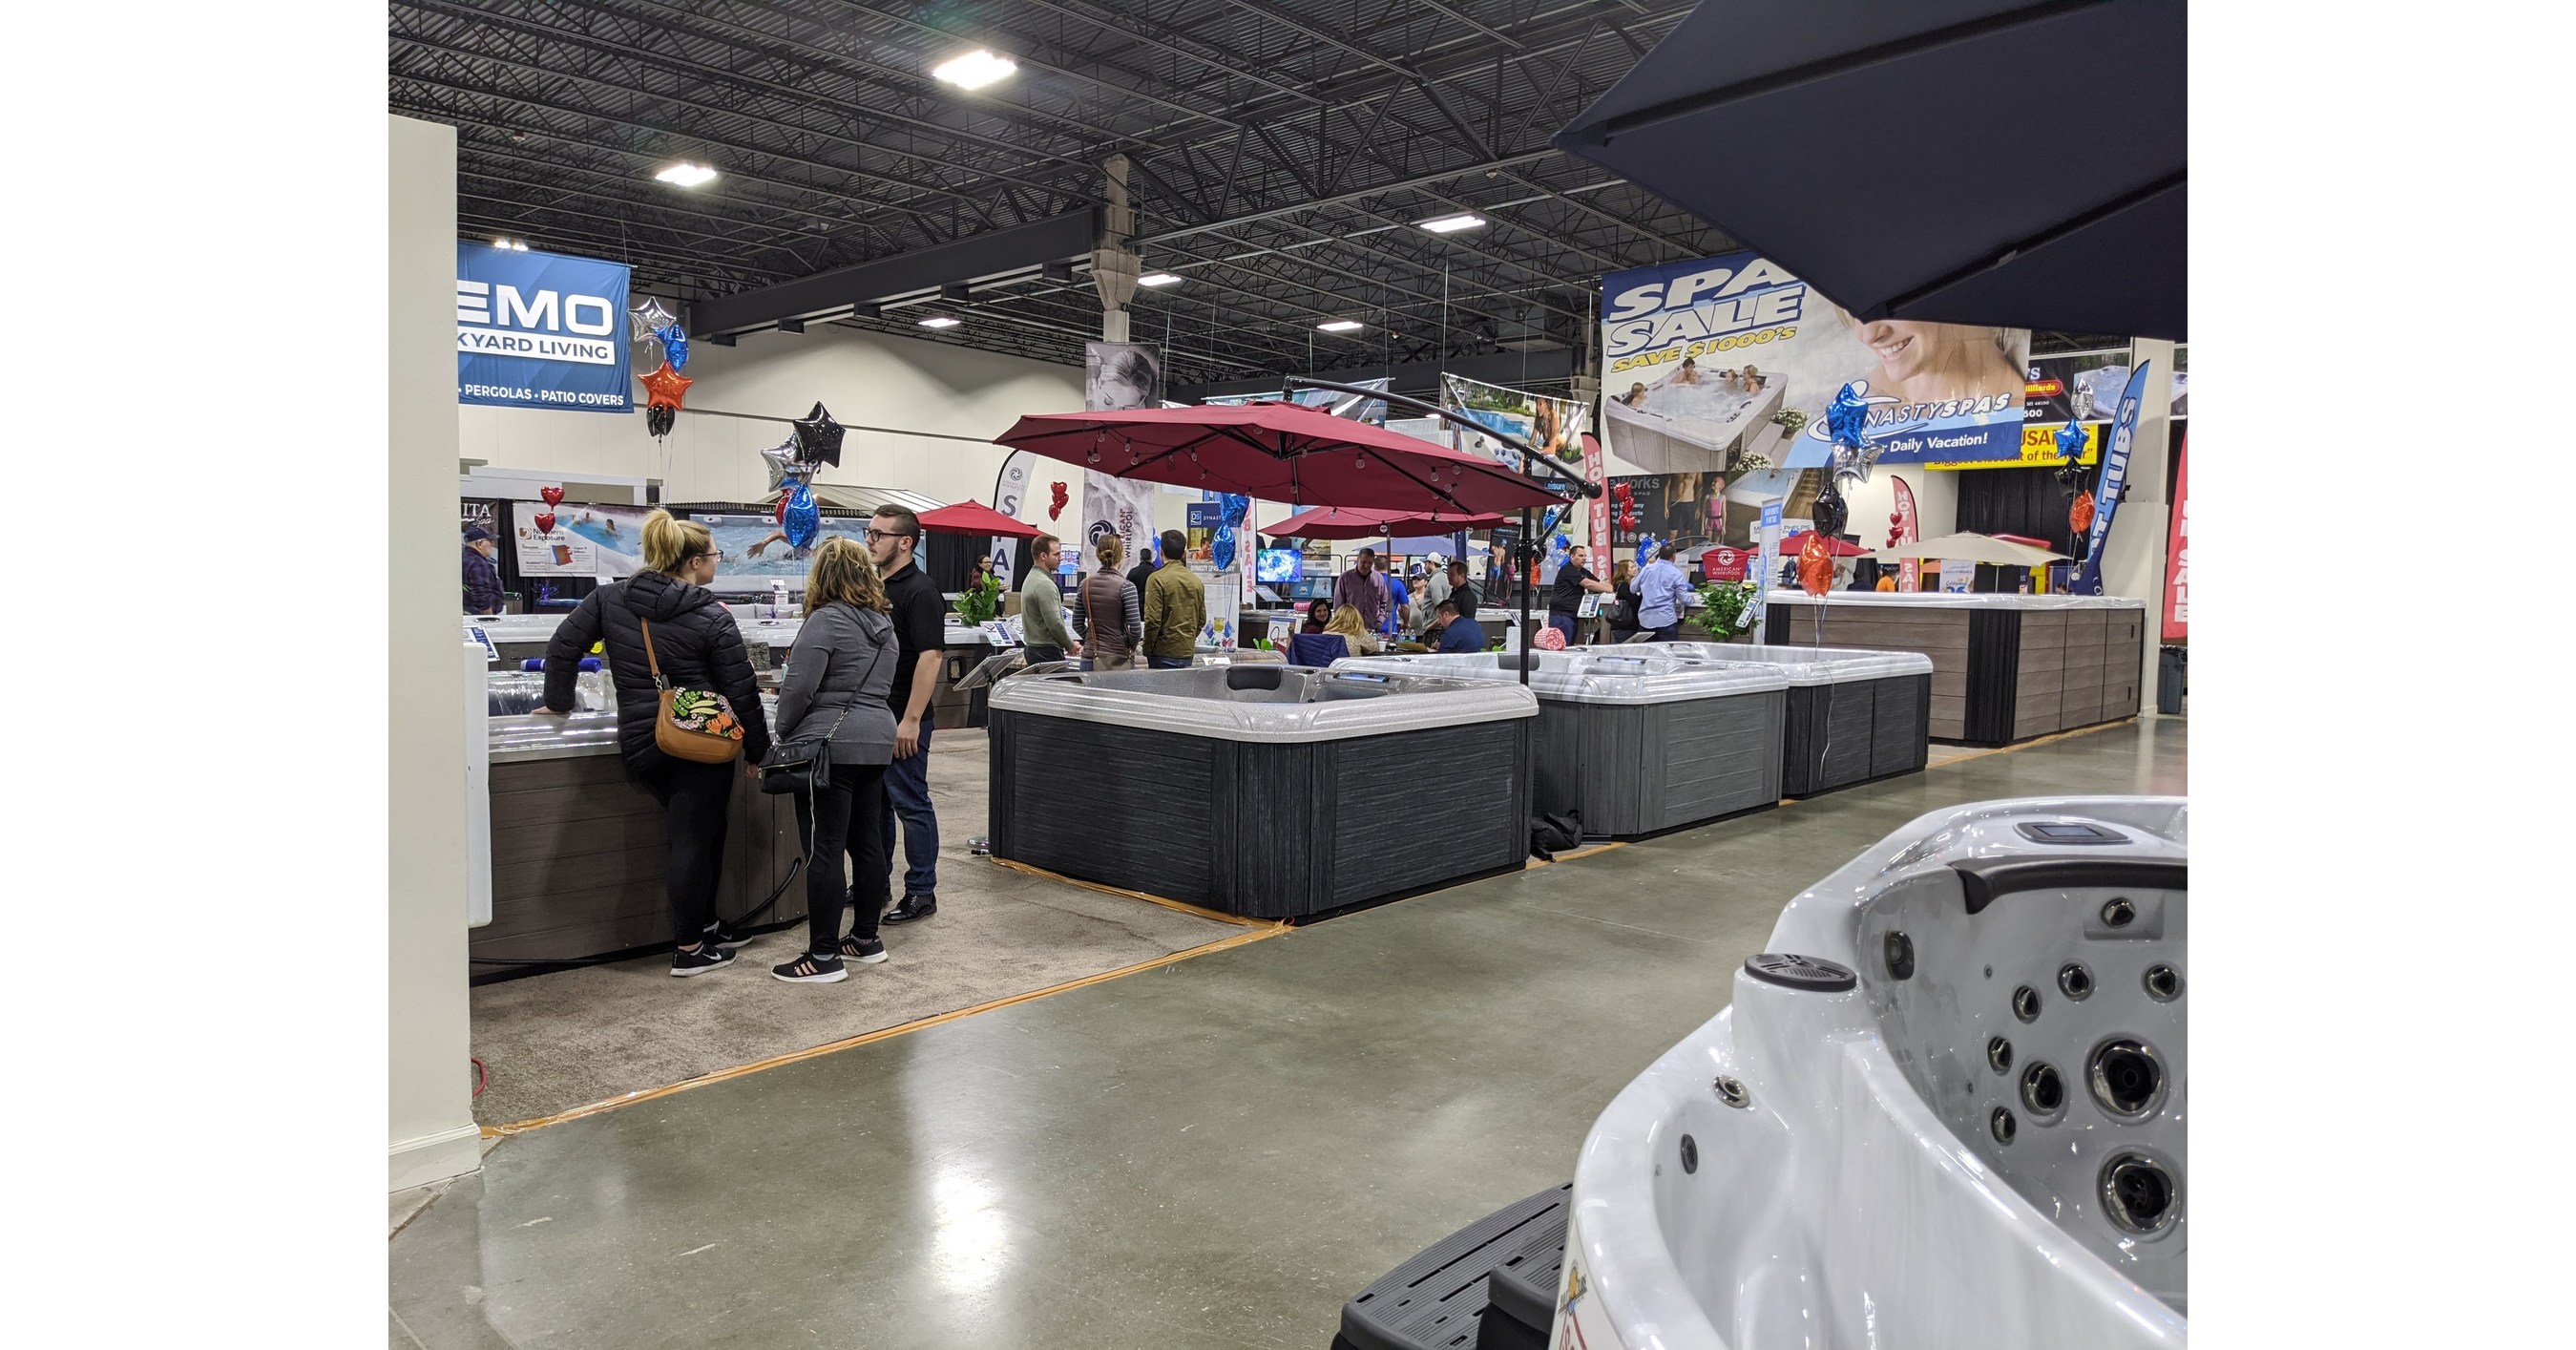 The 25th Annual Backyard, Pool & Spa Show Reports Record Sales in 2020